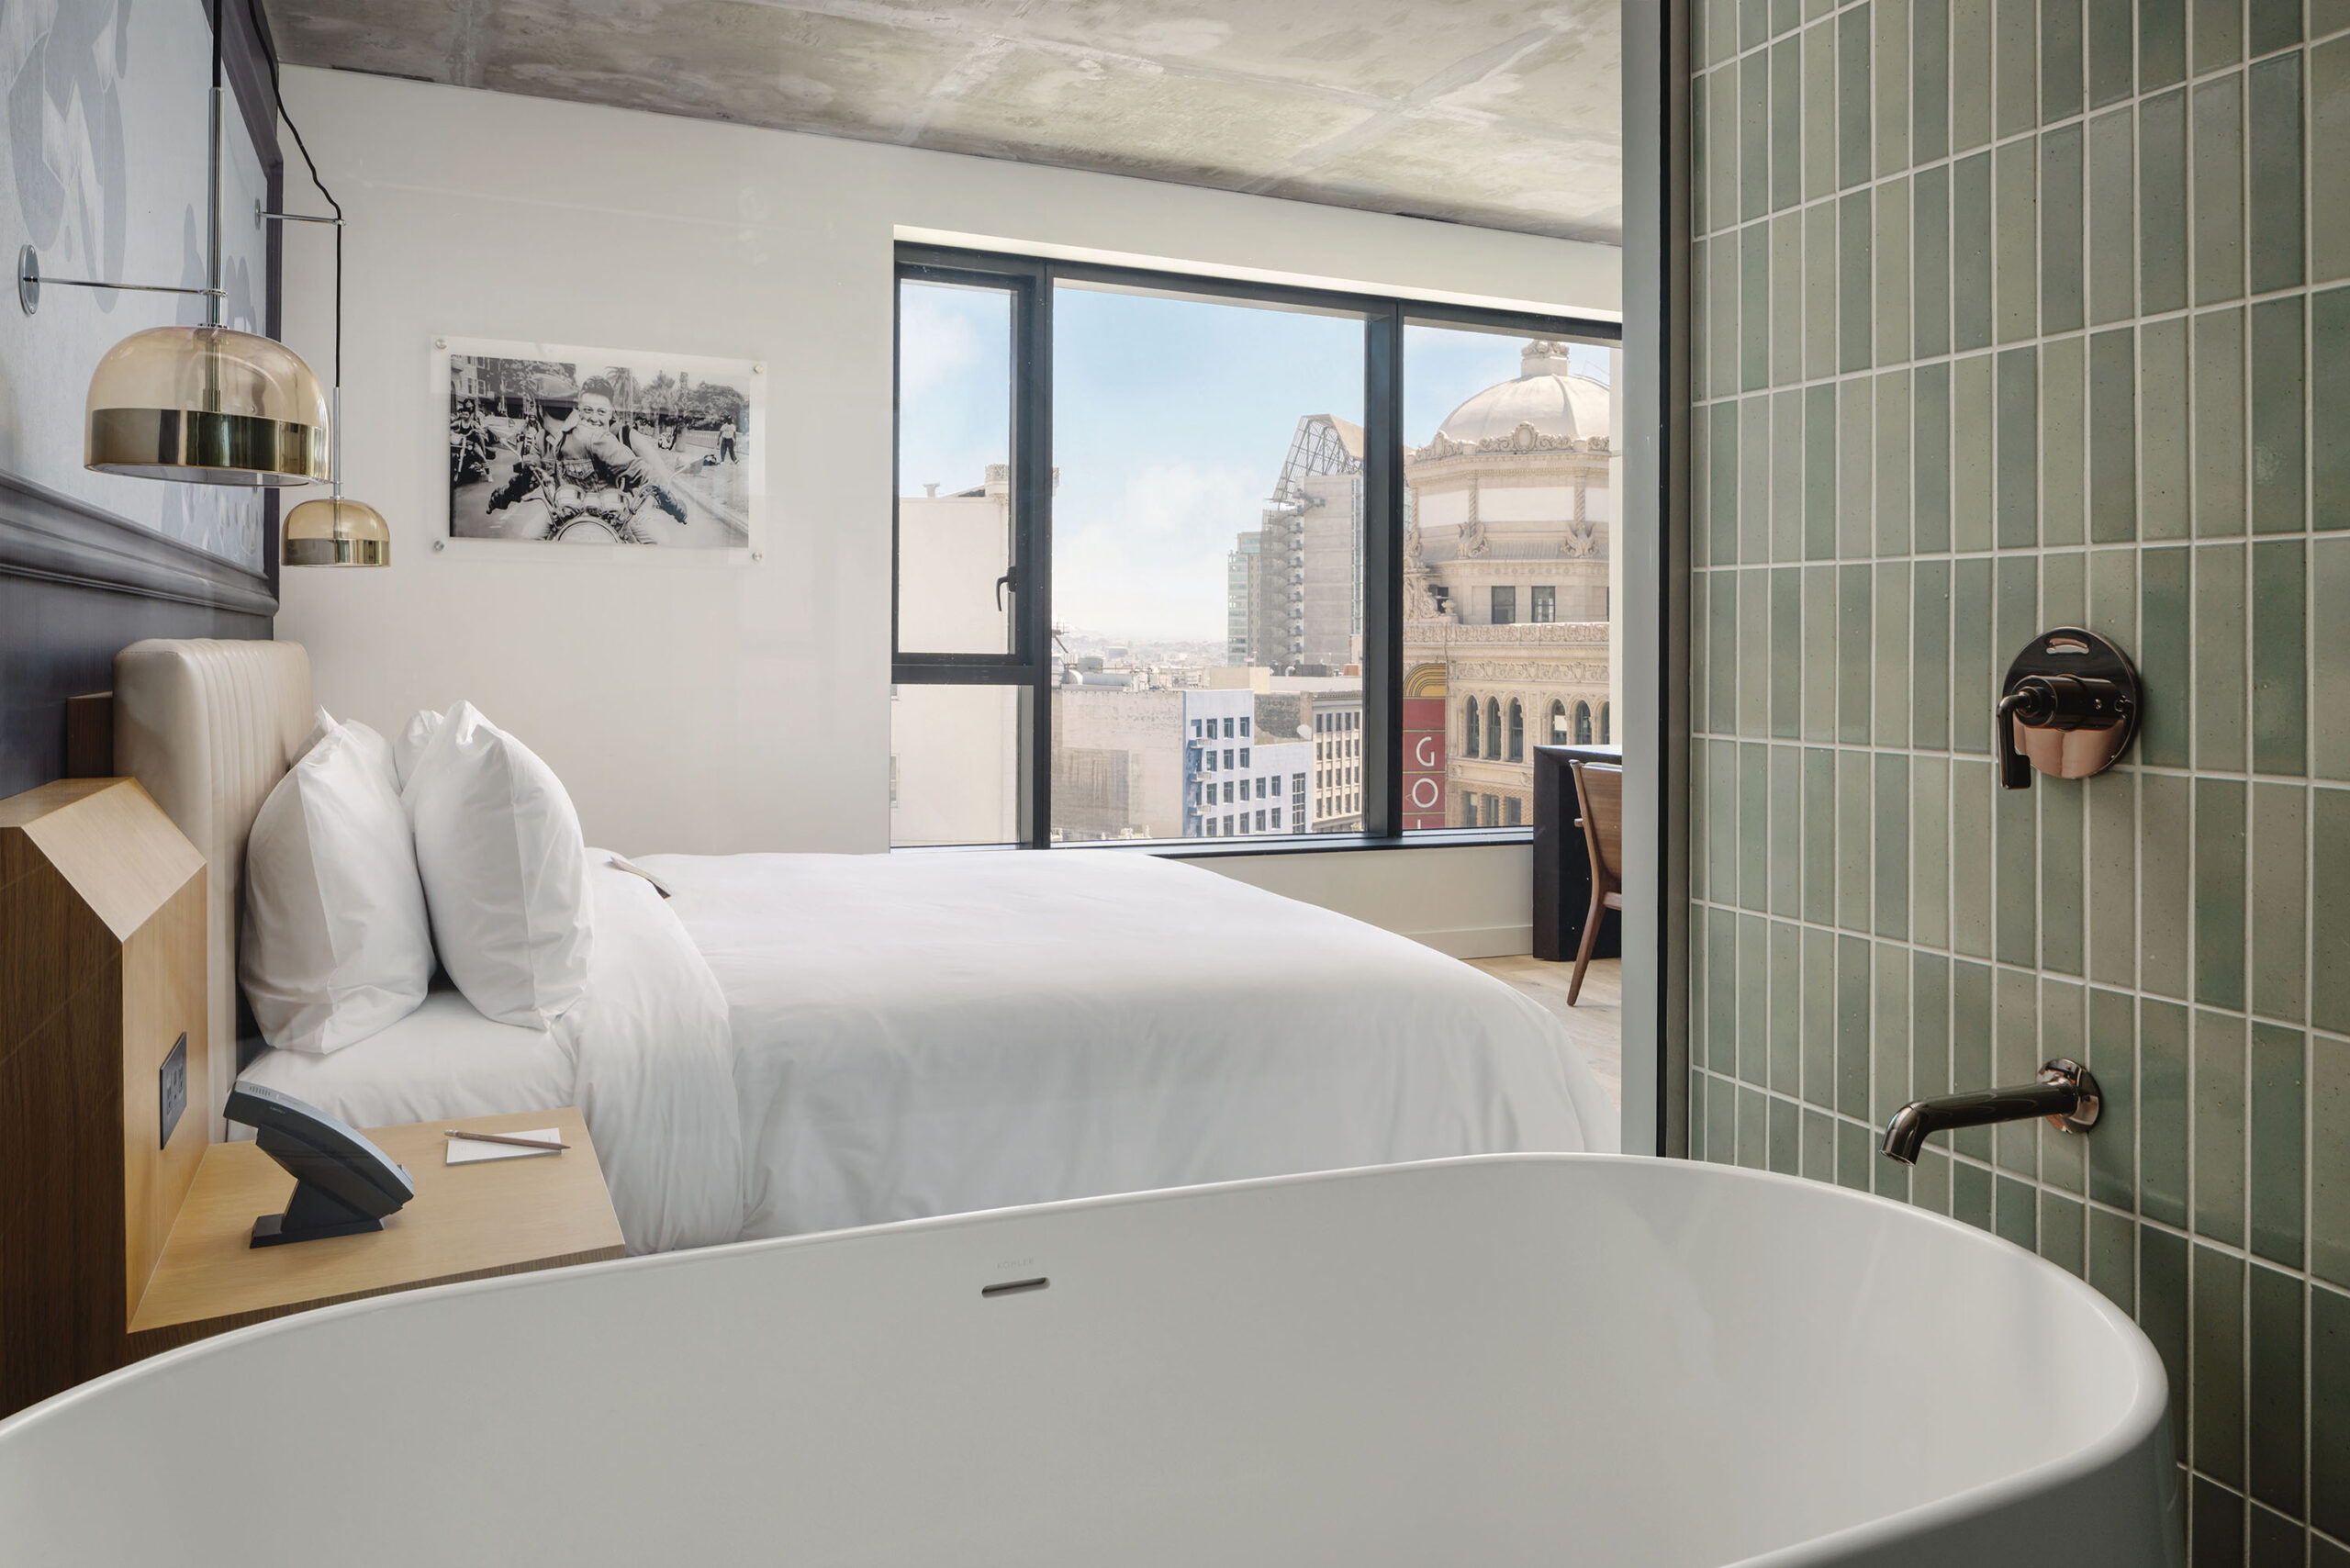 A soaking tub and hotel bed in a room with skyline views